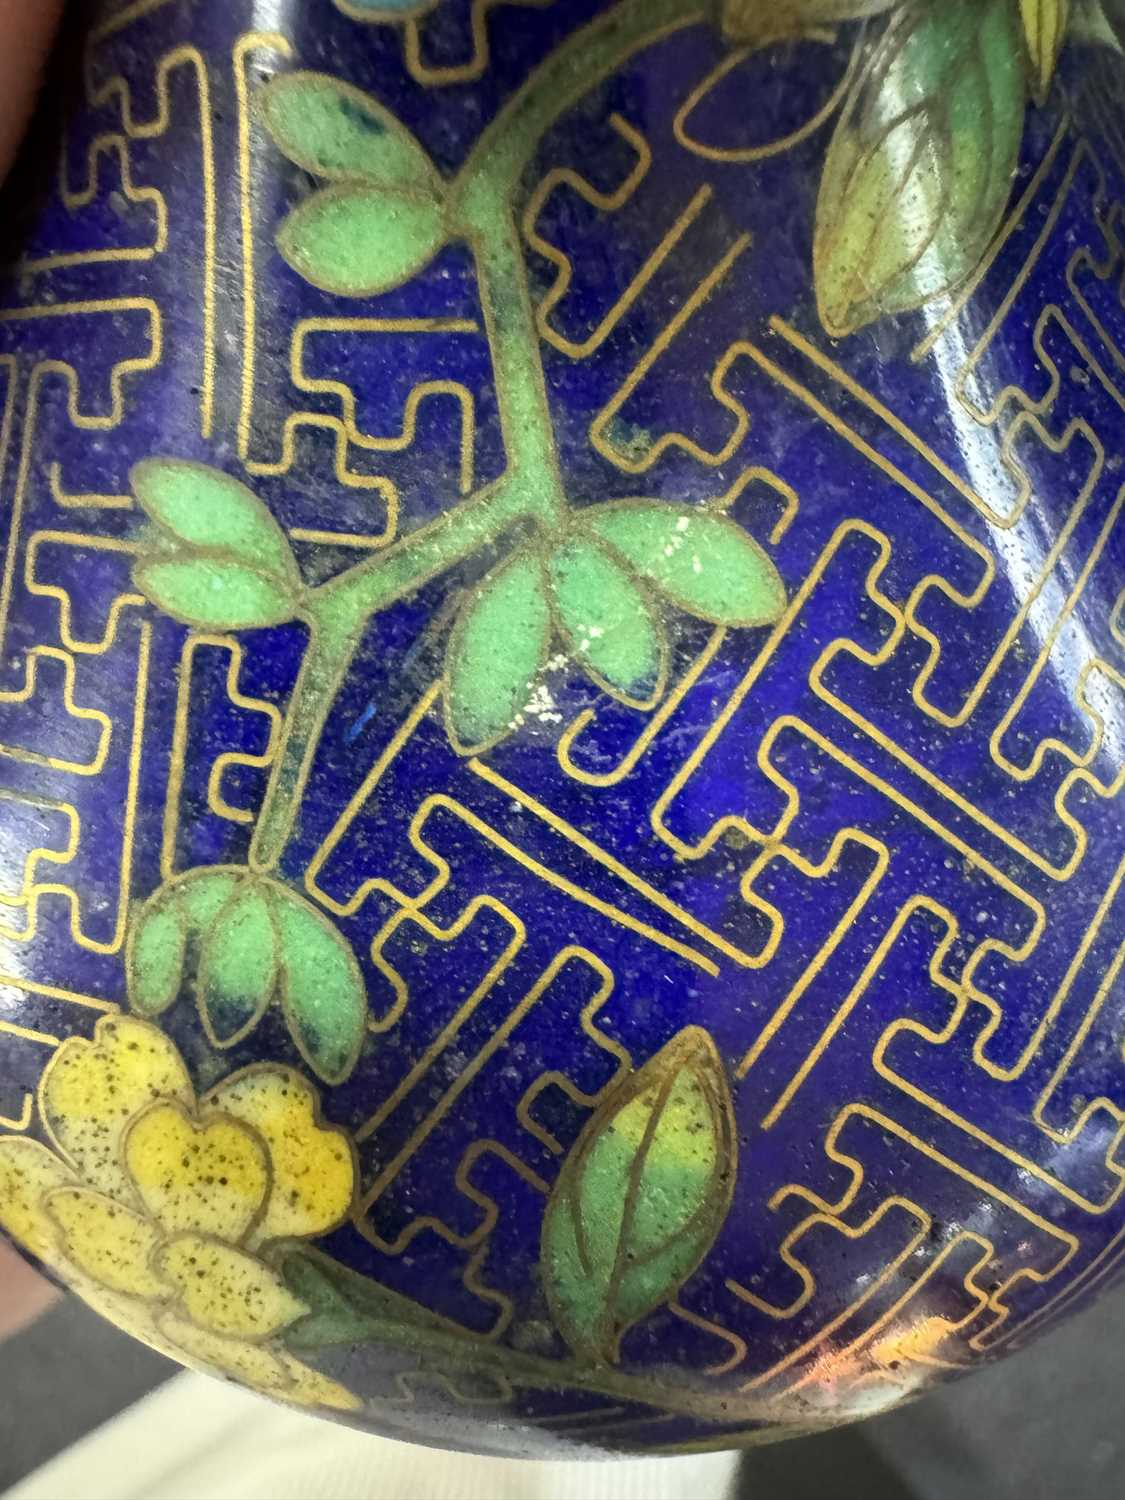 GROUP OF THREE CHINESE CLOISONNE VASES, EARLY 20TH CENTURY - Image 4 of 5